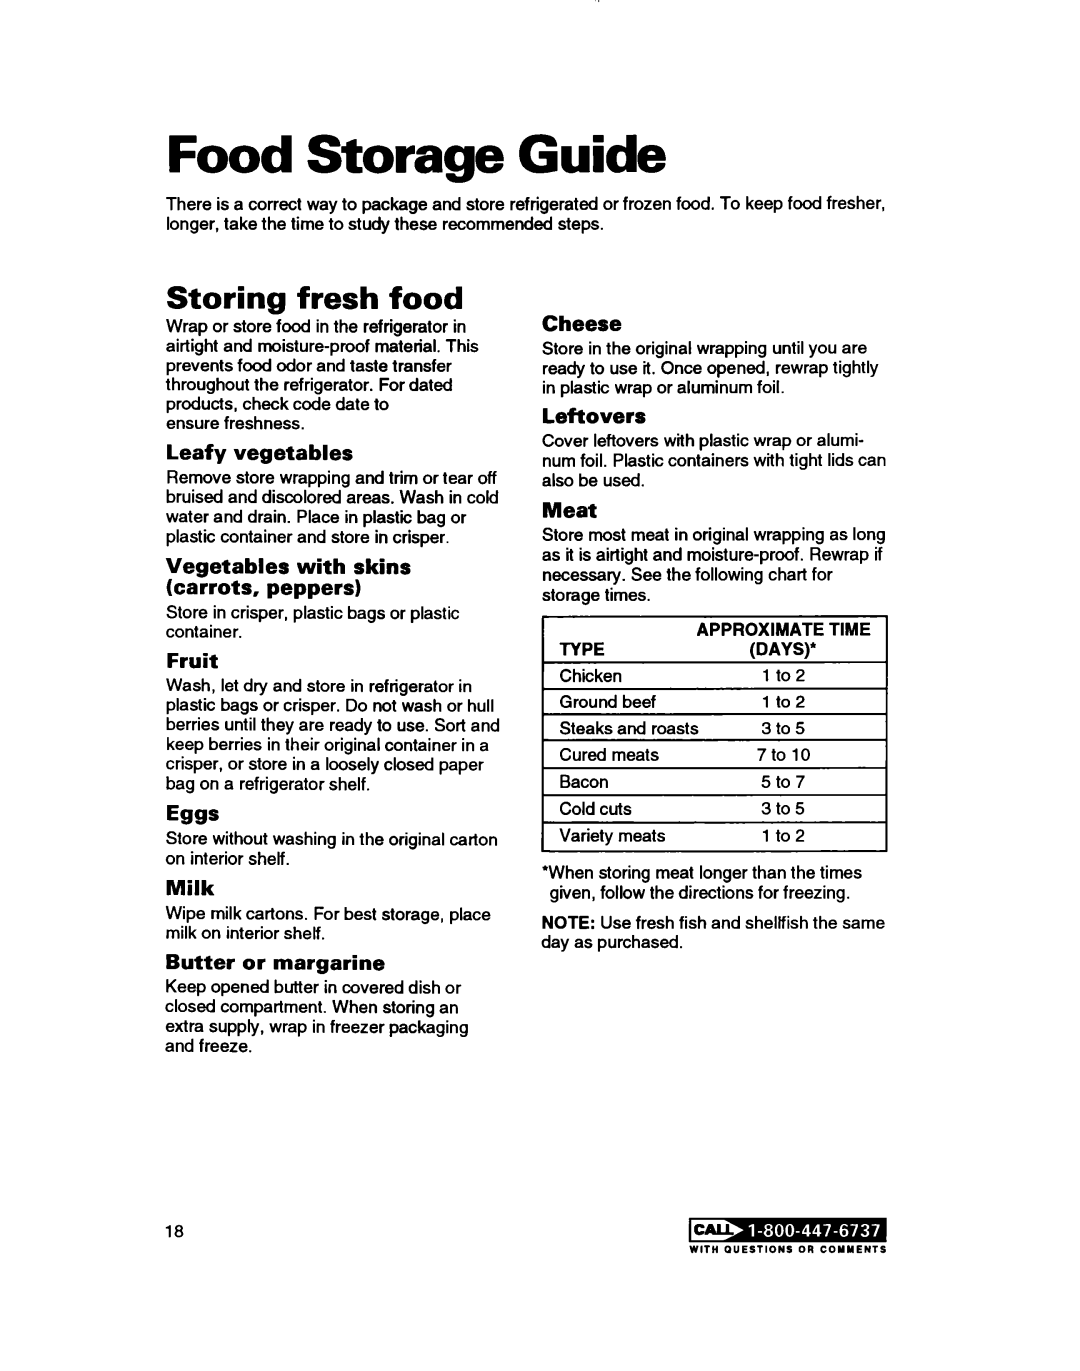 Whirlpool RT14ZK Food Storage Guide, Storing fresh food, Leafy vegetables, Vegetables with skins carrots. peppers, Fruit 